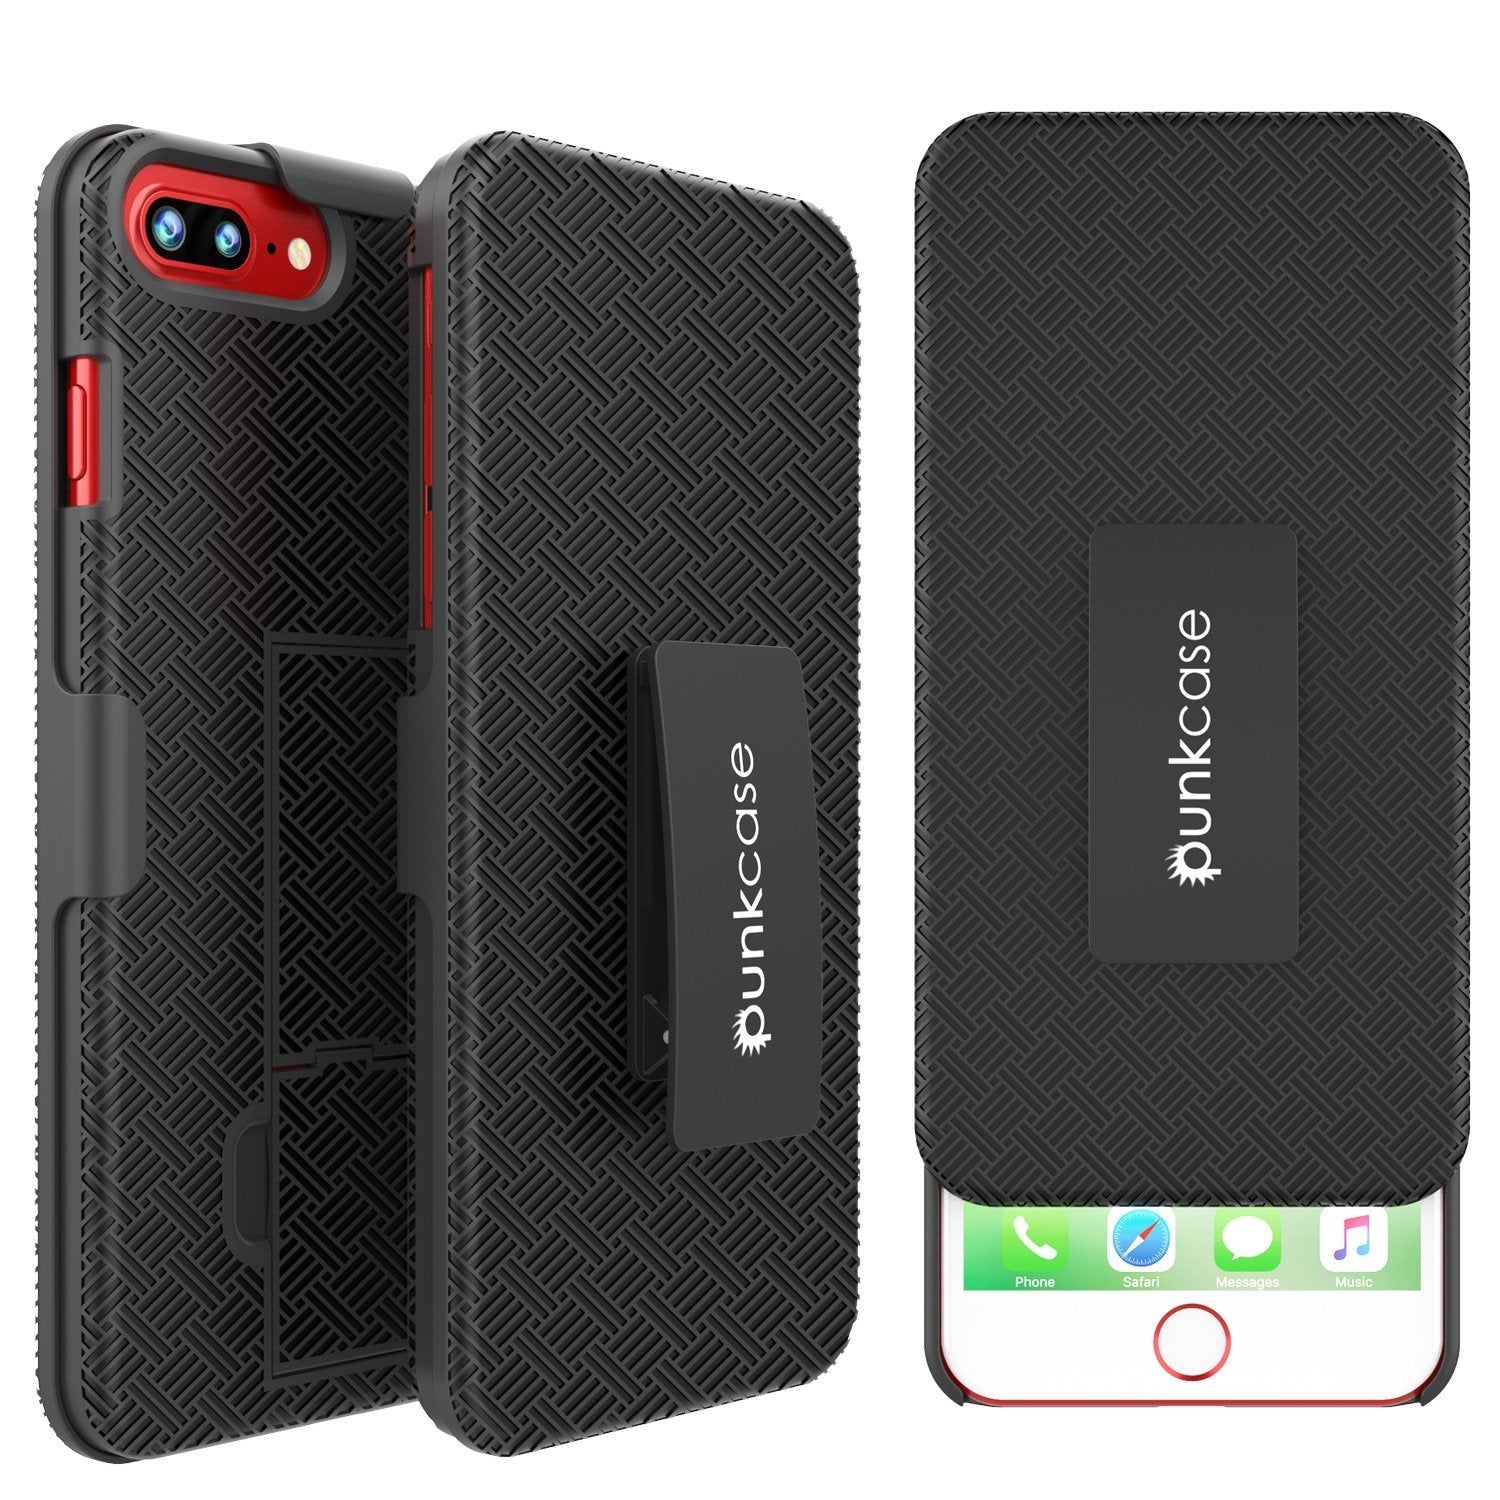 Punkcase iPhone 8 / 7 Plus Case With Tempered Glass Screen Protector, Holster Belt Clip & Built-In Kickstand Non Slip Dual Layer Hybrid TPU Full Body Protection [Thin Fit] for Apple iPhone 7+ & 8+ [Black]